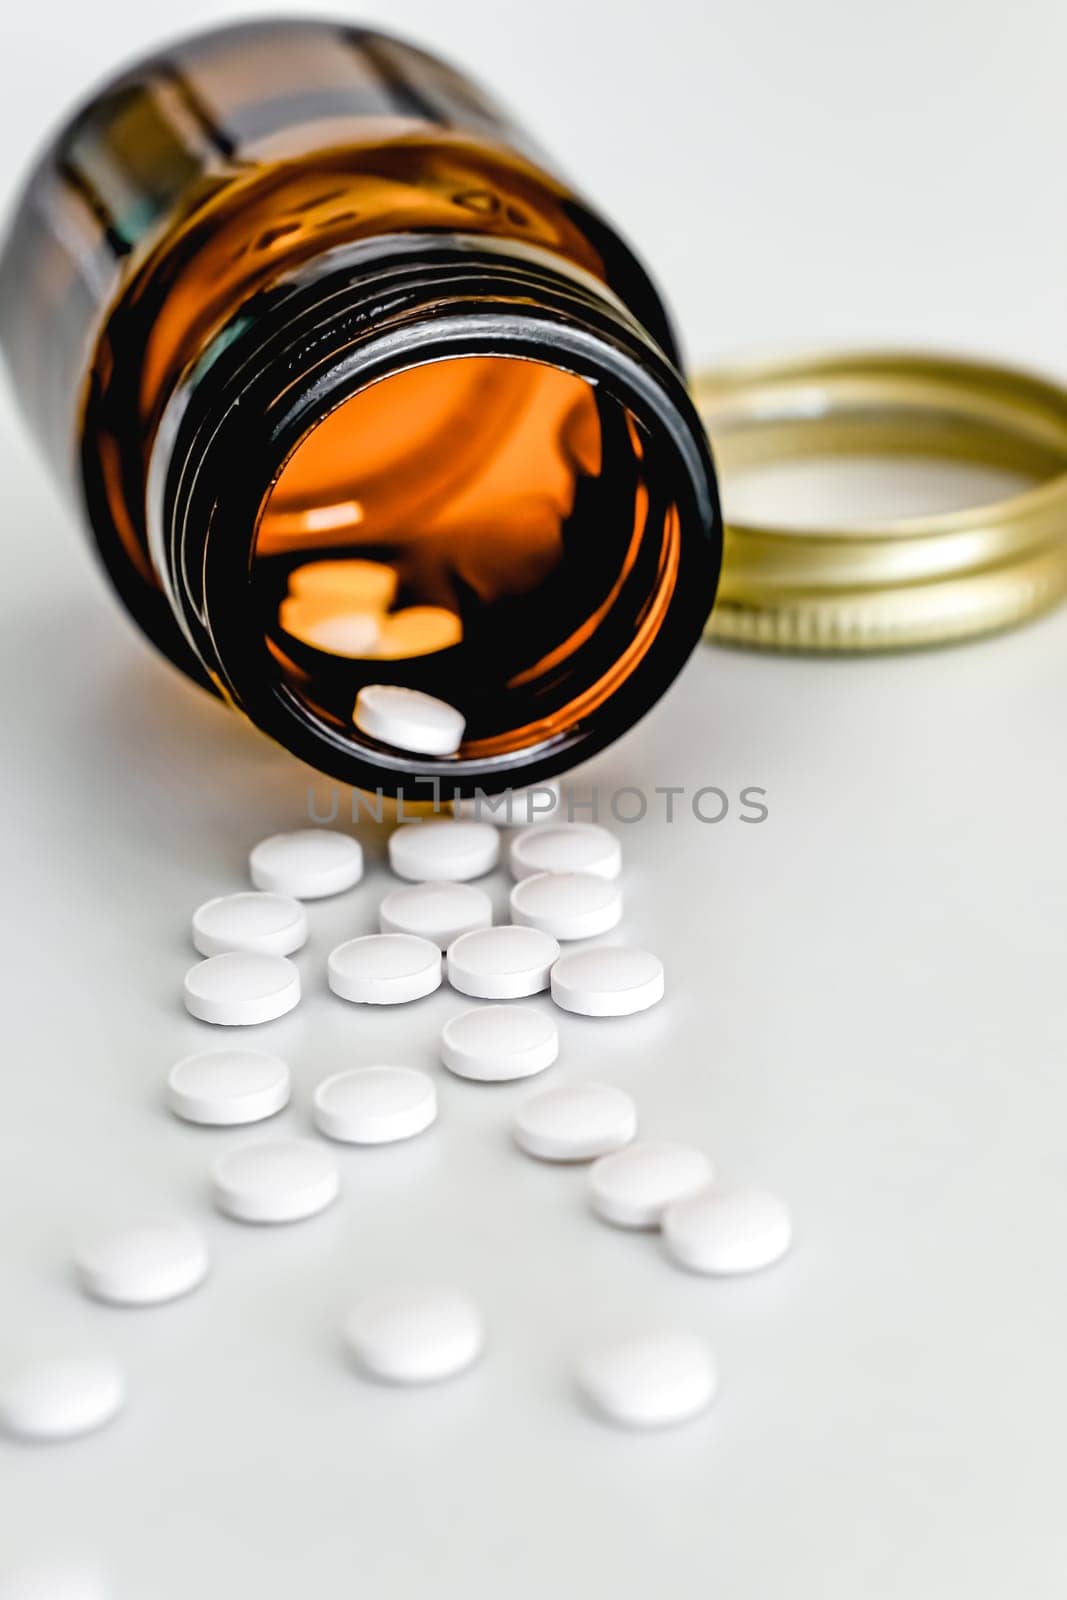 White Tablets Scattered on Table Next to Brown Glass Vial, on White Background, Close-up, Vertical Frame. by Laguna781